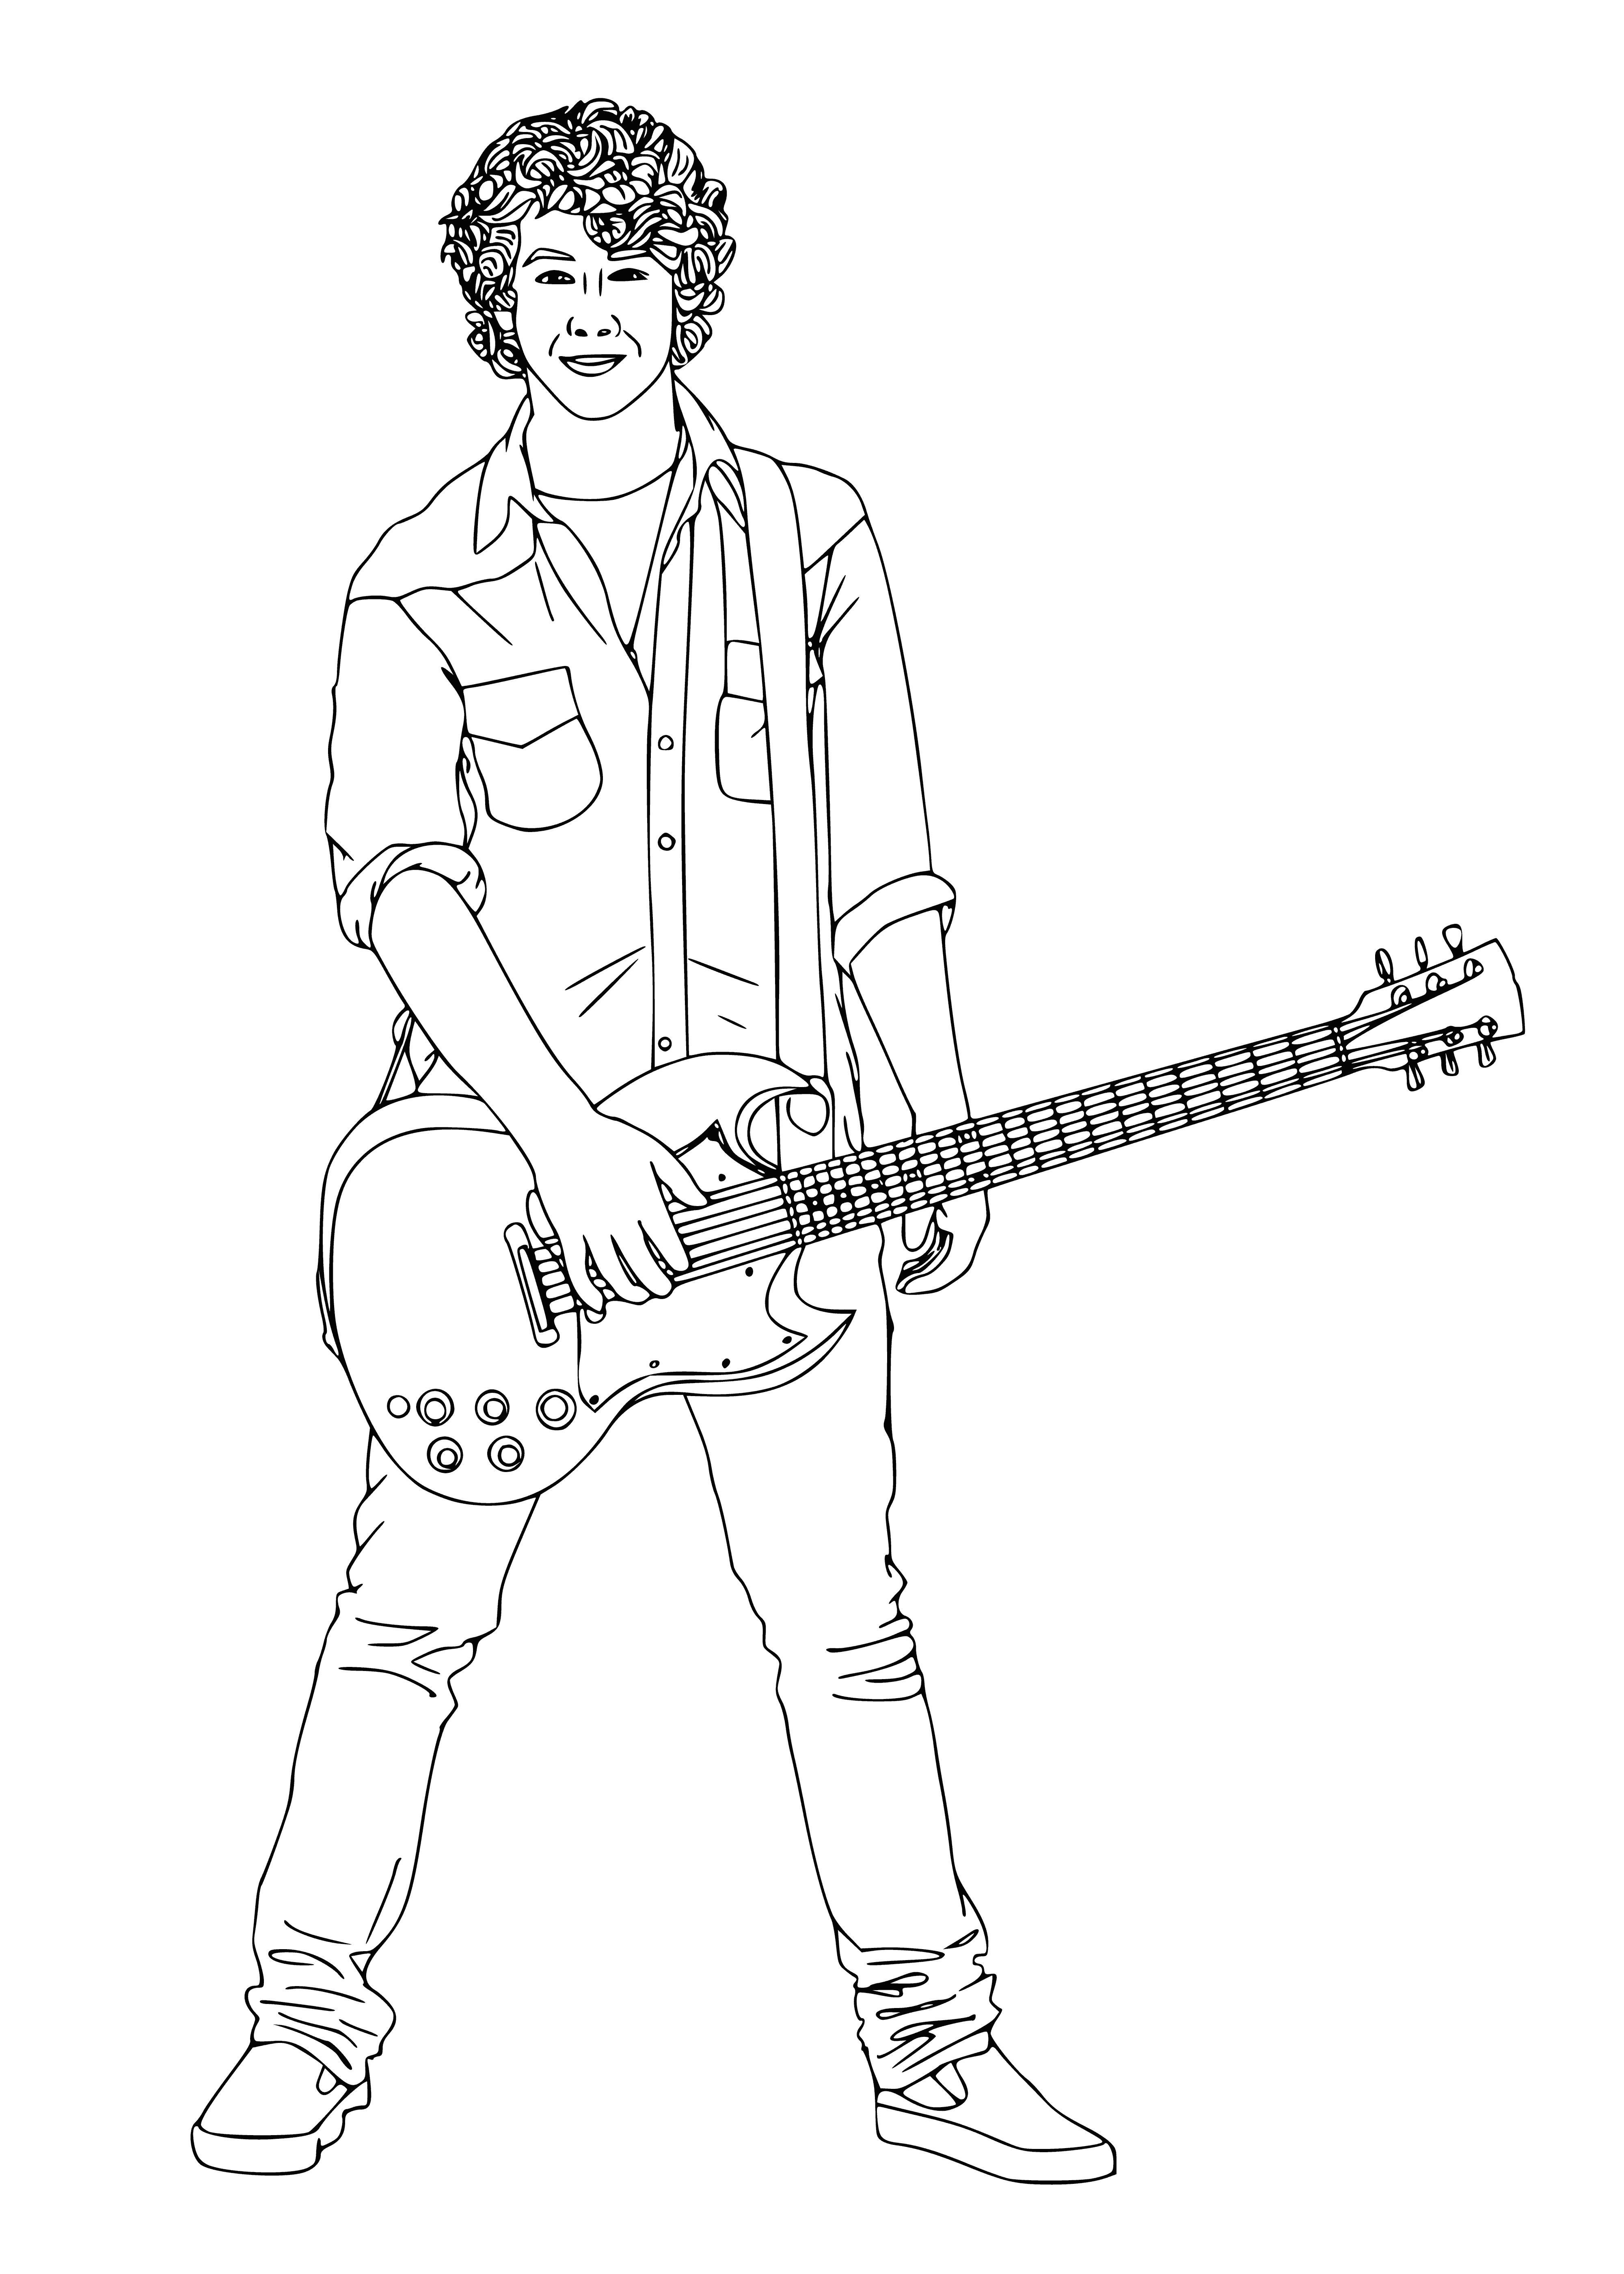 coloring page: Person playing electric guitar in black shirt, long hair, strap around neck to hold while standing.